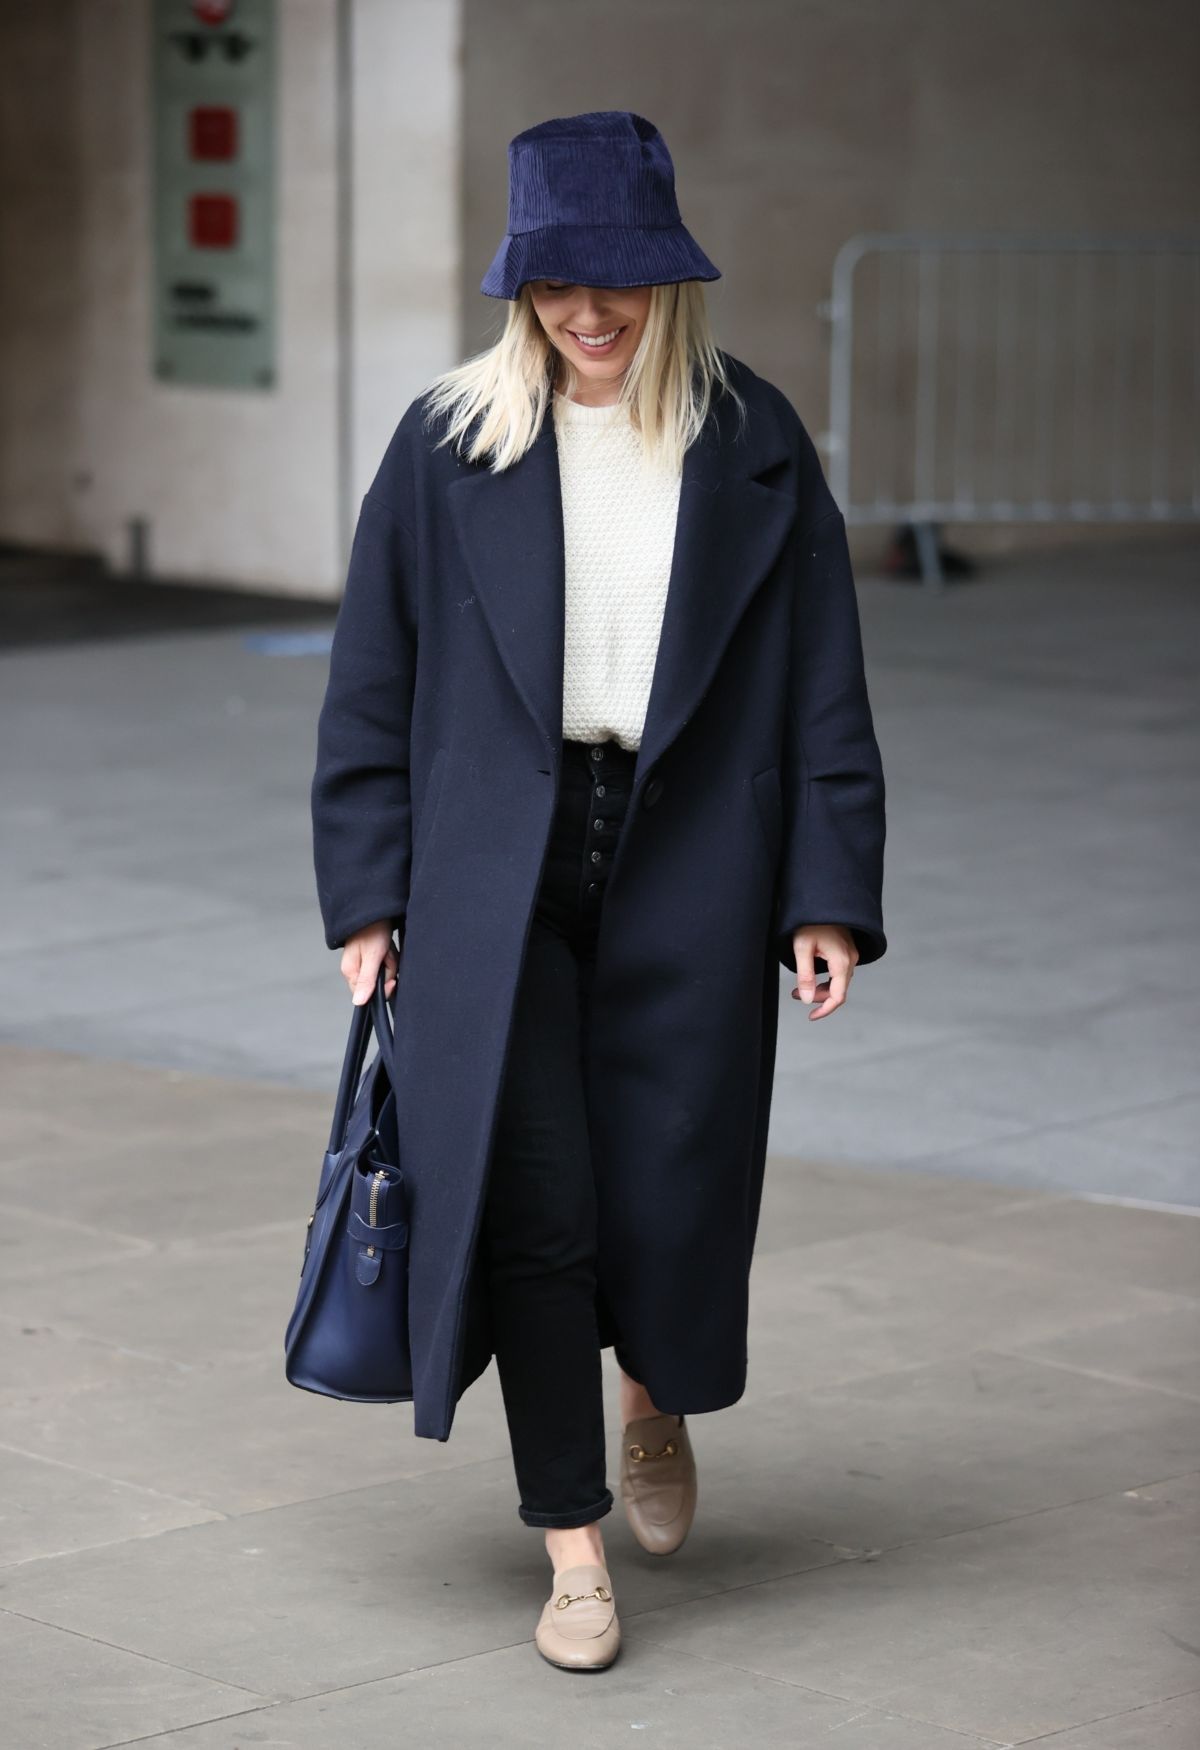 Mollie King Arrives at BBC Studios in London 2020/10/24 7